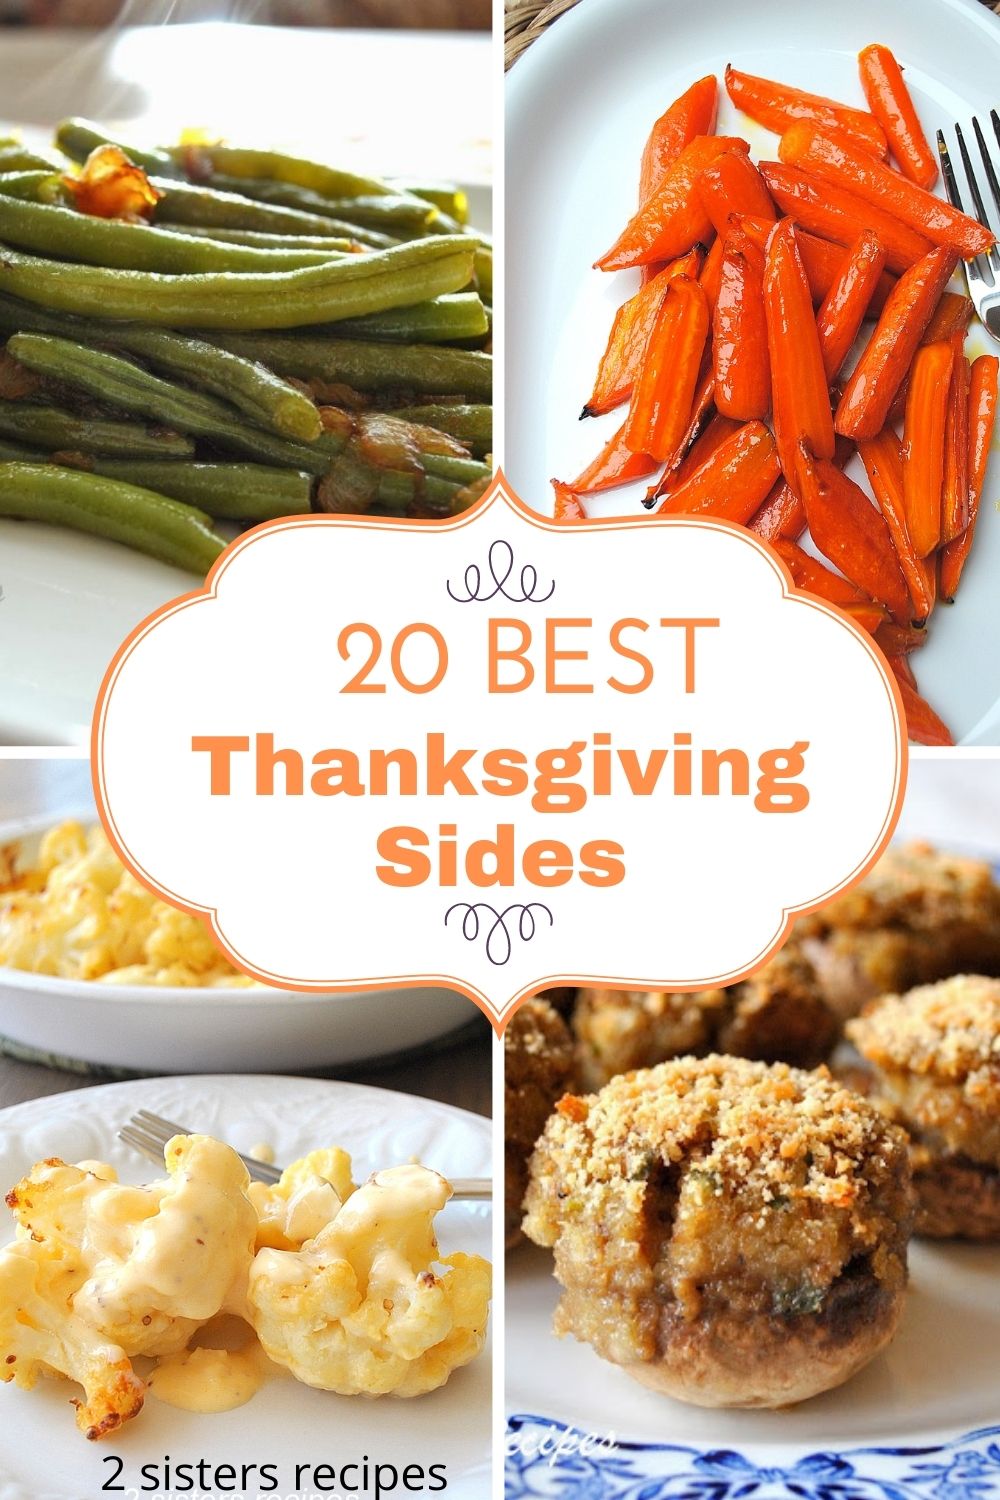 20+Best Thanksgiving Sides - 2 Sisters Recipes by Anna and Liz